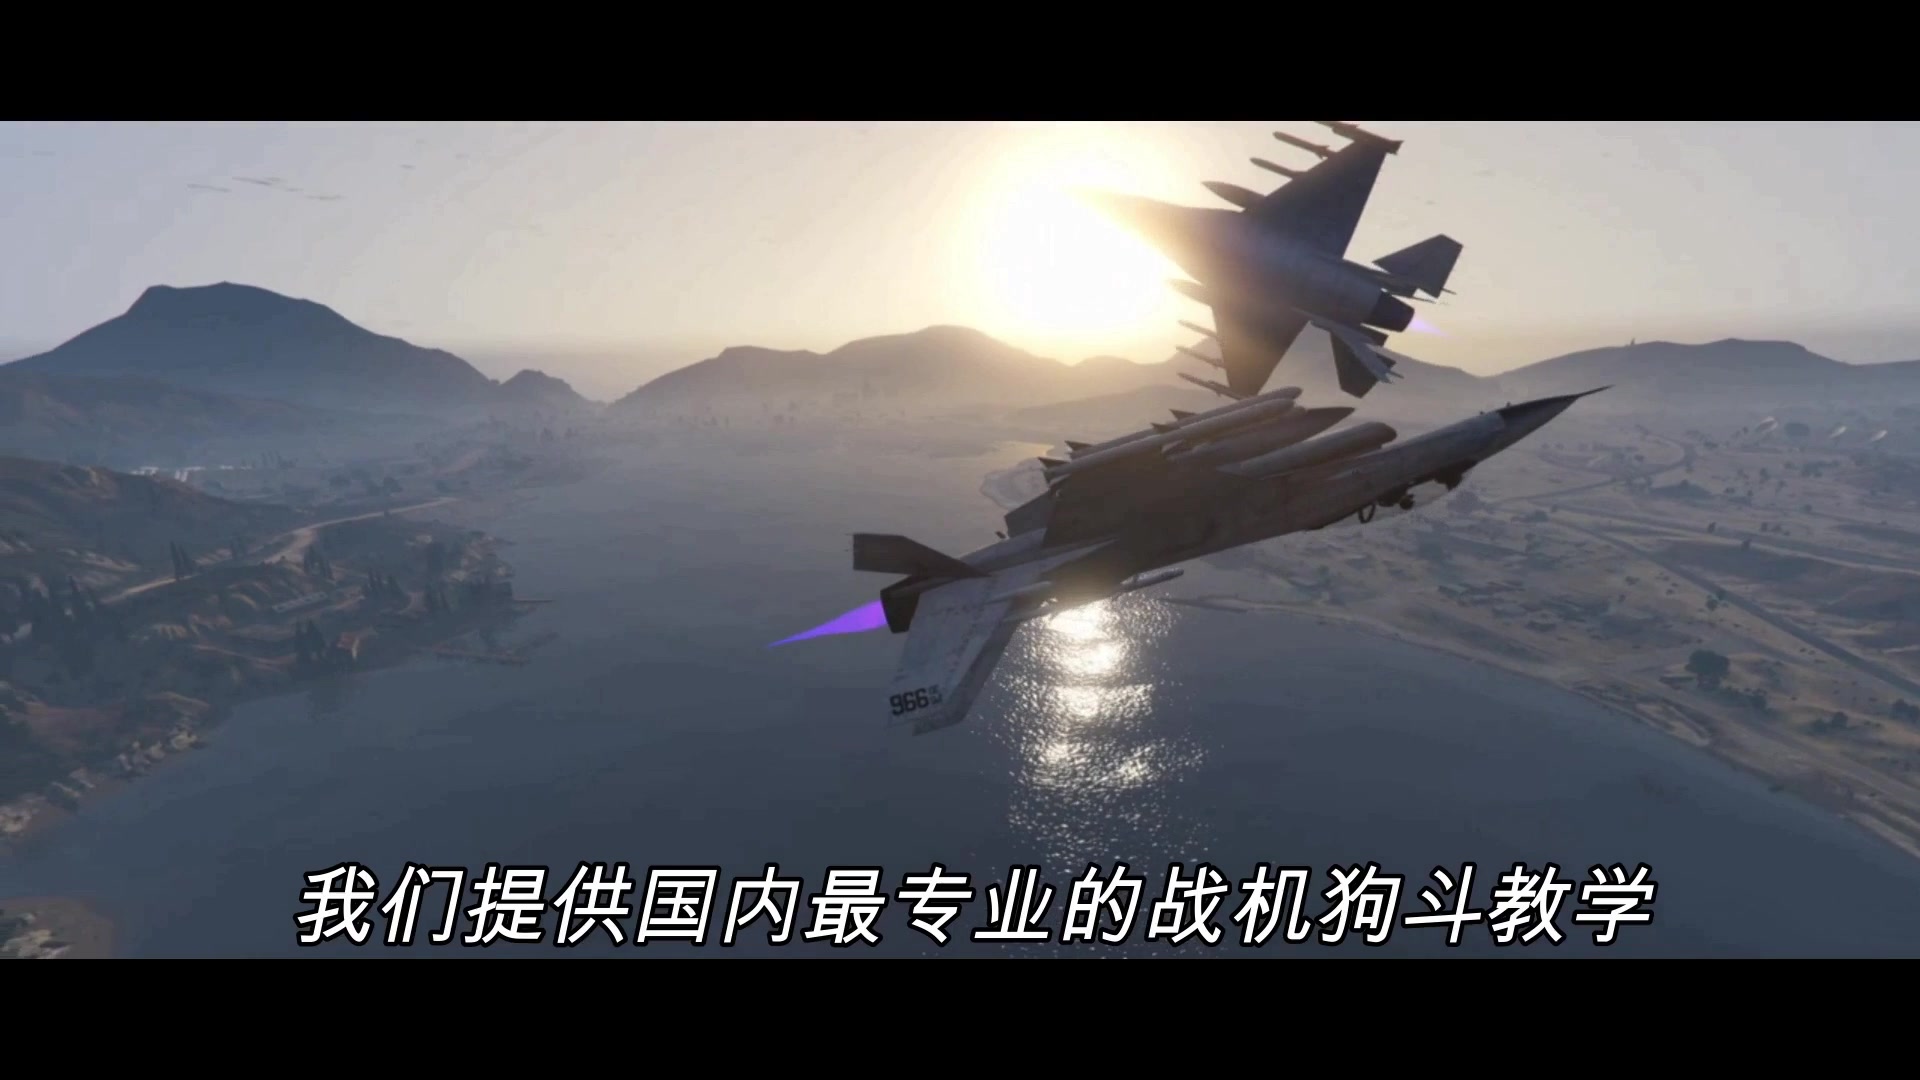 Chinese Soldiers - GTA5-Mods.com